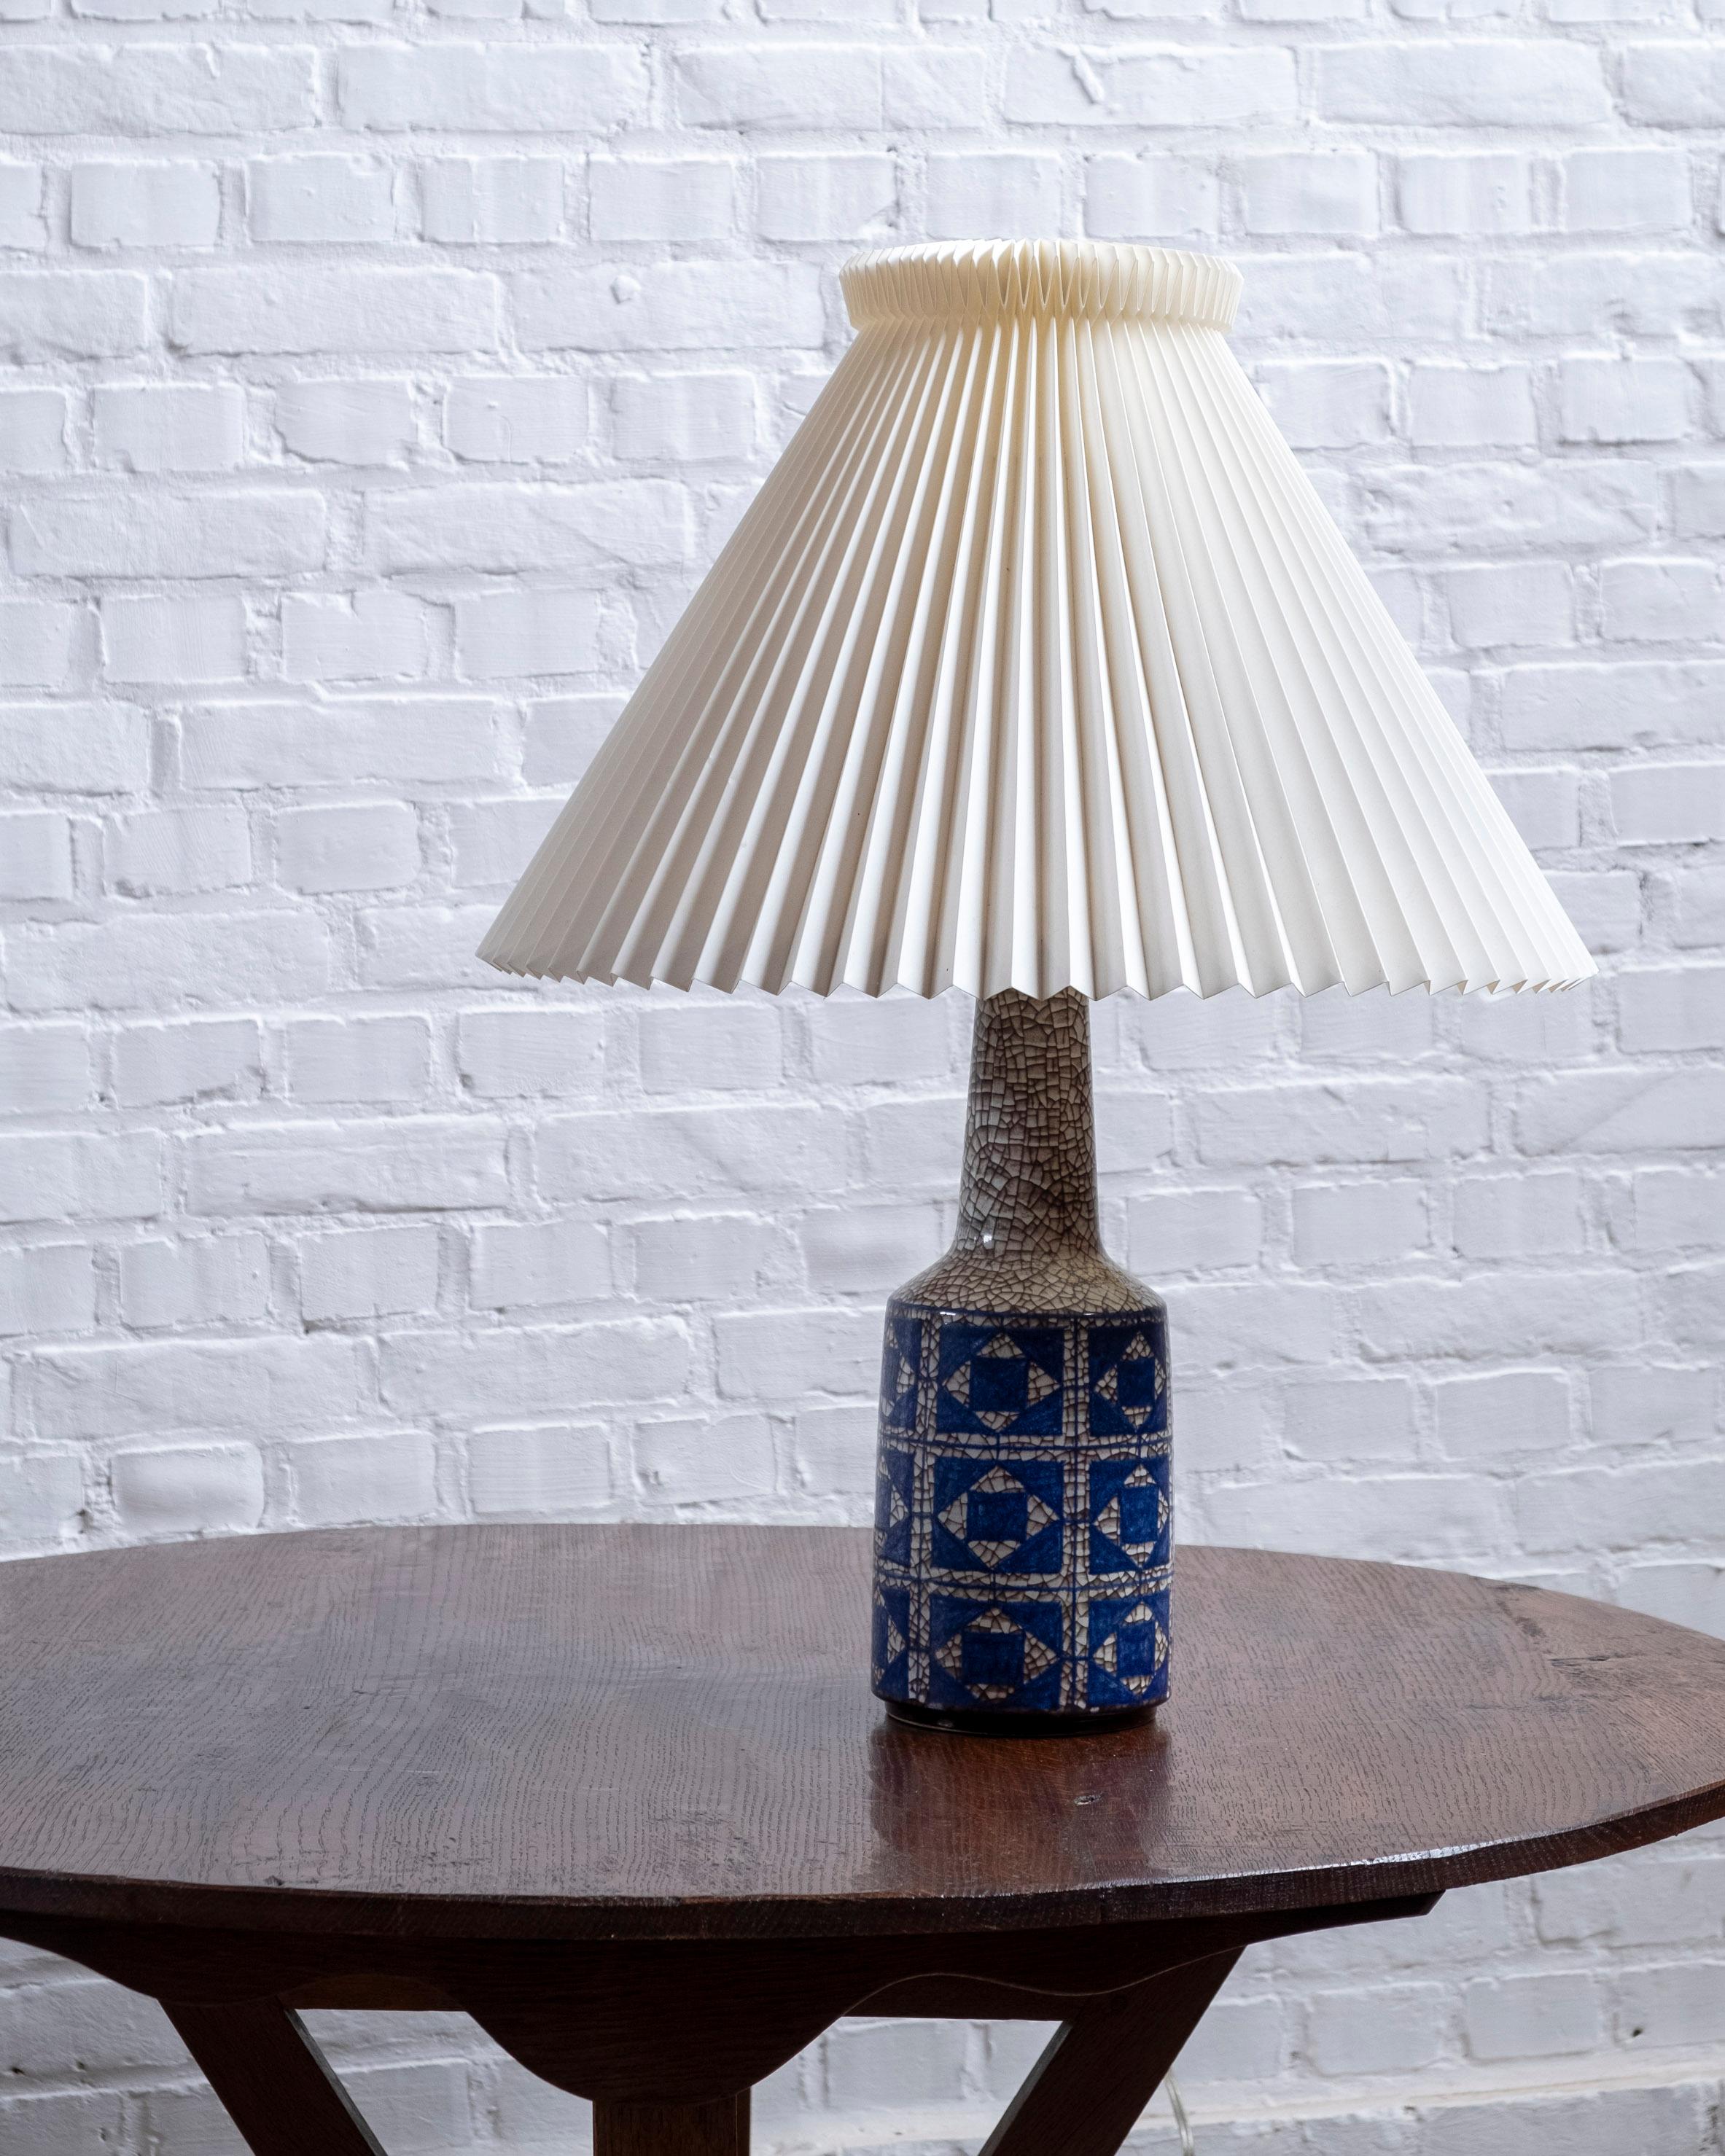 Stunning ceramic table lamp made in Denmark in the 1950s by Michael Andersen & Son from Bornholm. The lamp was designed by artist Marianne Stack and features the so-called  